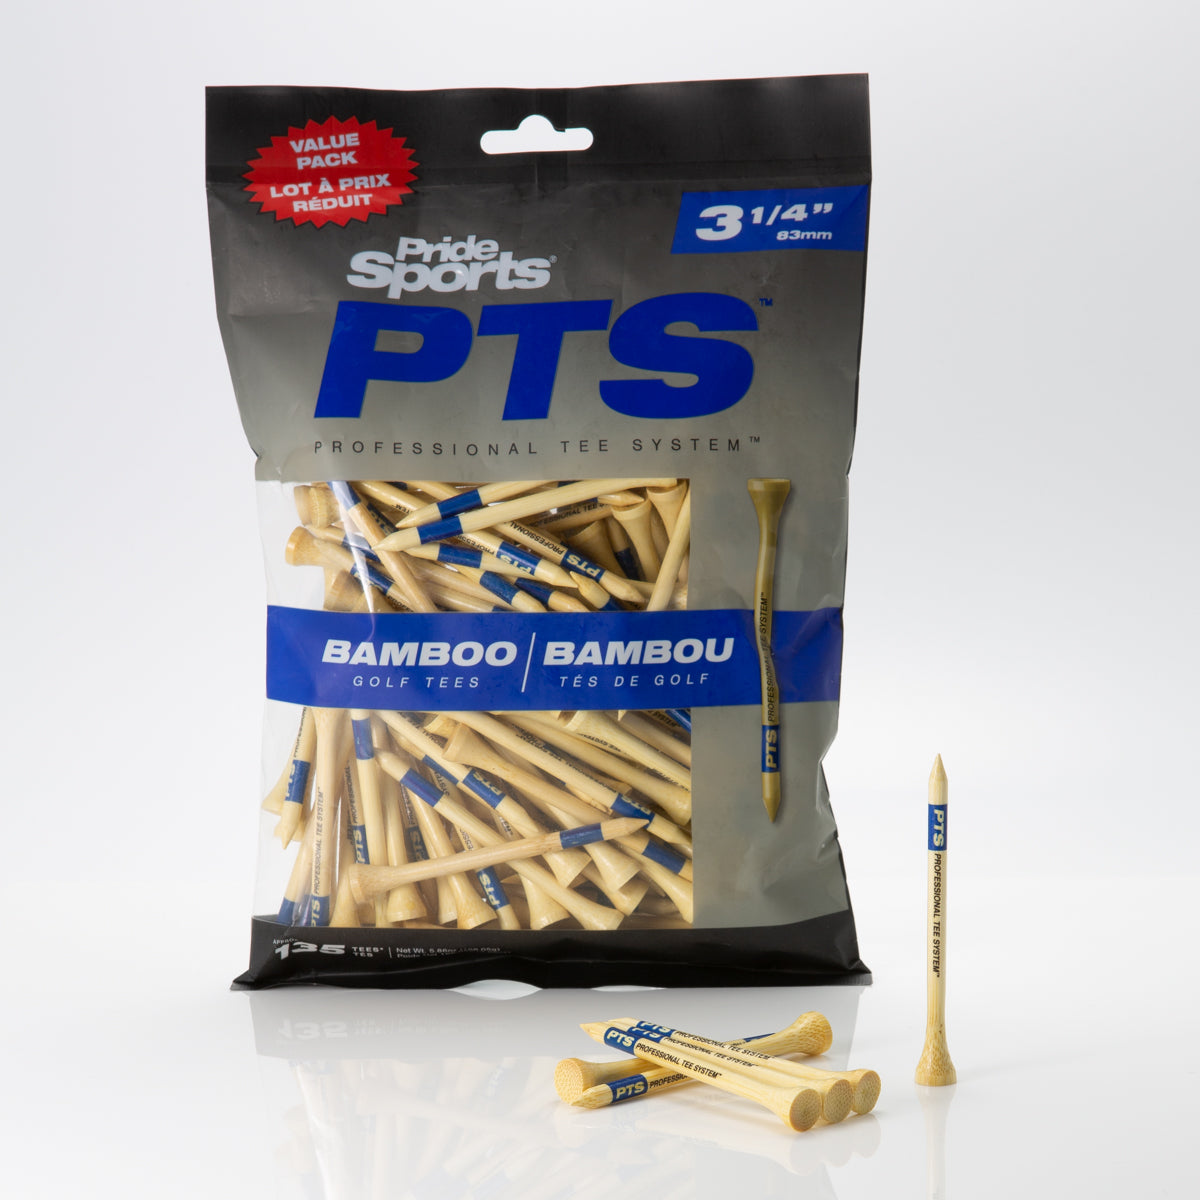 Professional Tee System™ (PTS)- 3 1/4" Bamboo Tees